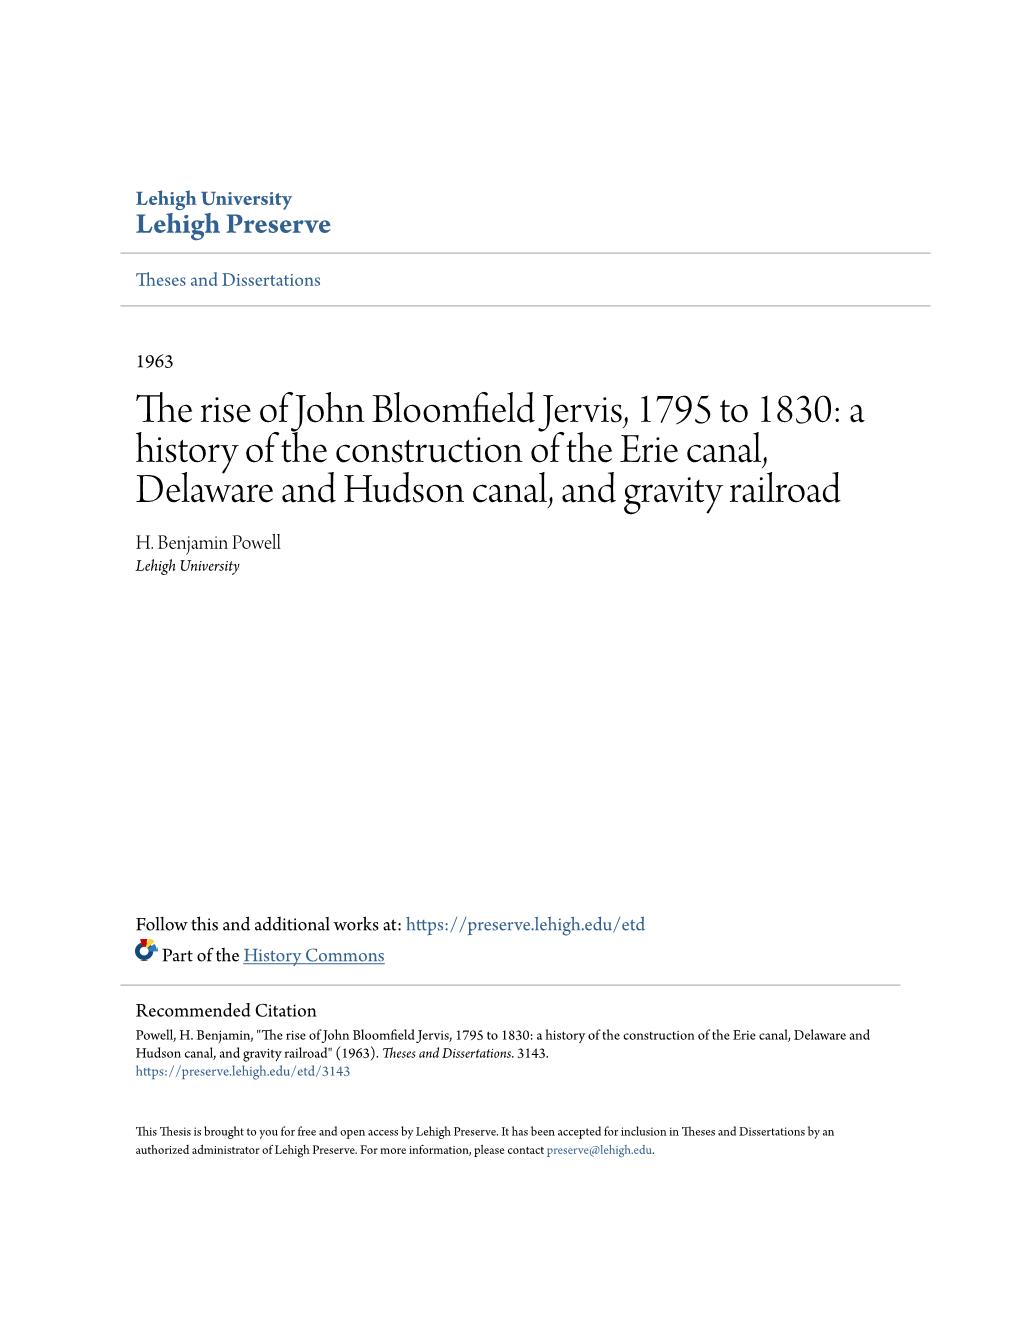 The Rise of John Bloomfield Jervis, 1795 to 1830: a History of the Construction of the Erie Canal, Delaware and Hudson Canal, and Gravity Railroad" (1963)